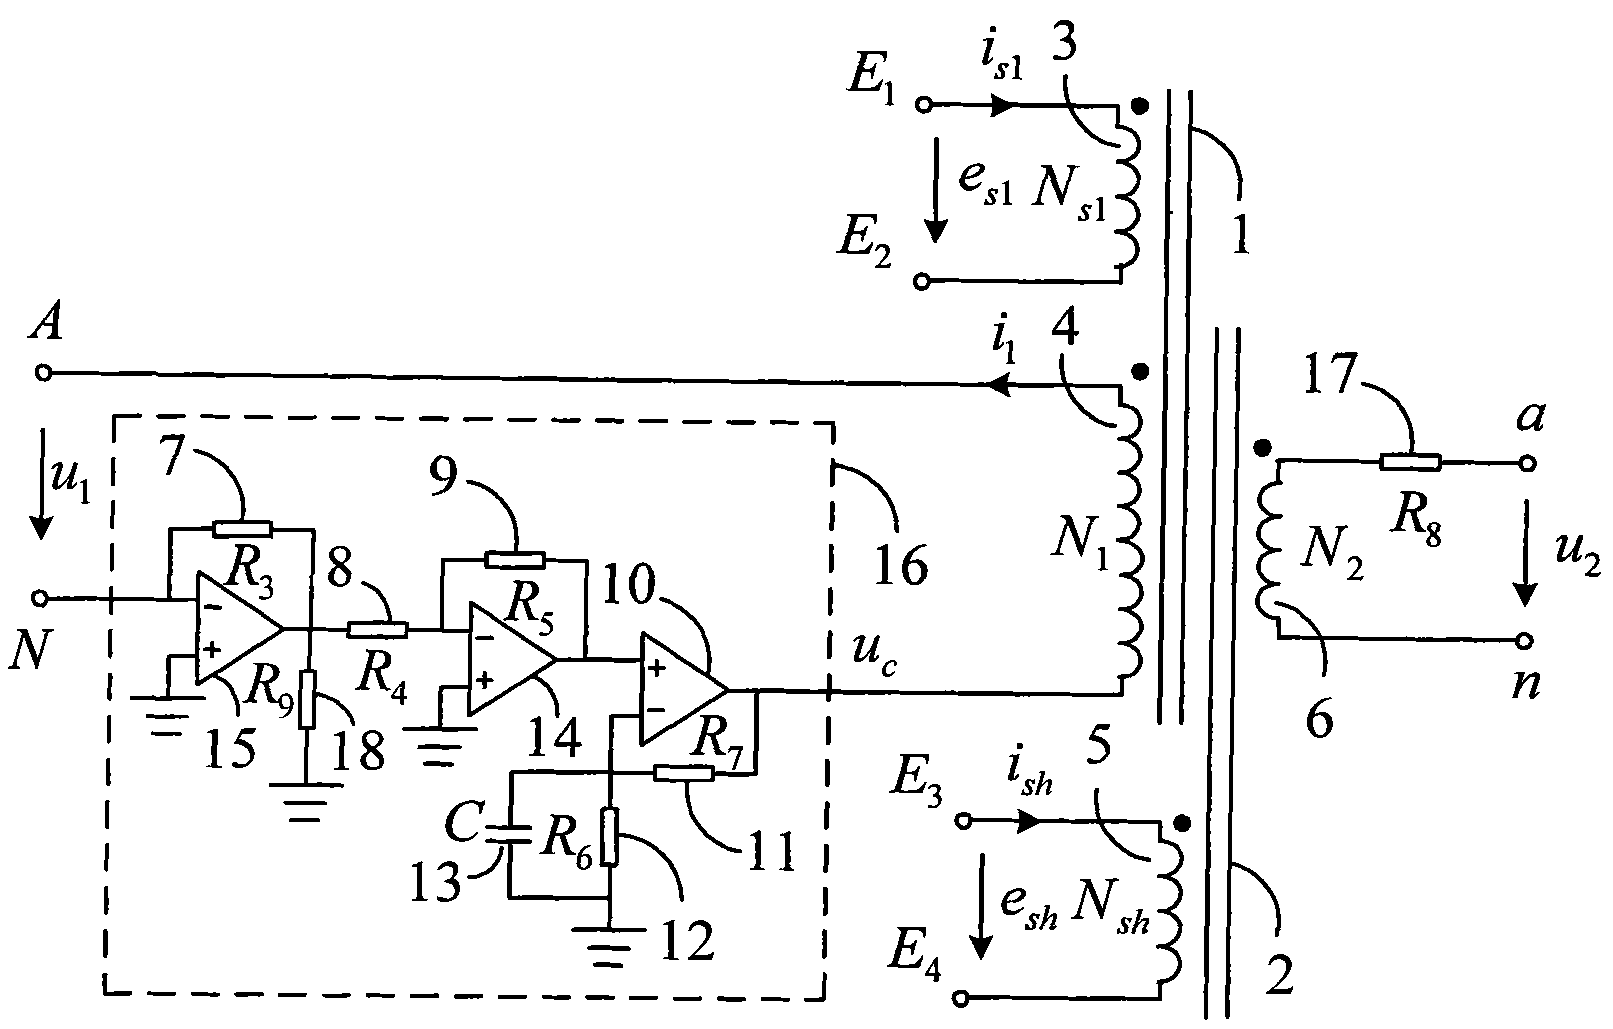 Periodic non-sinusoidal wave reference of electronic voltage transformer with voltage booster